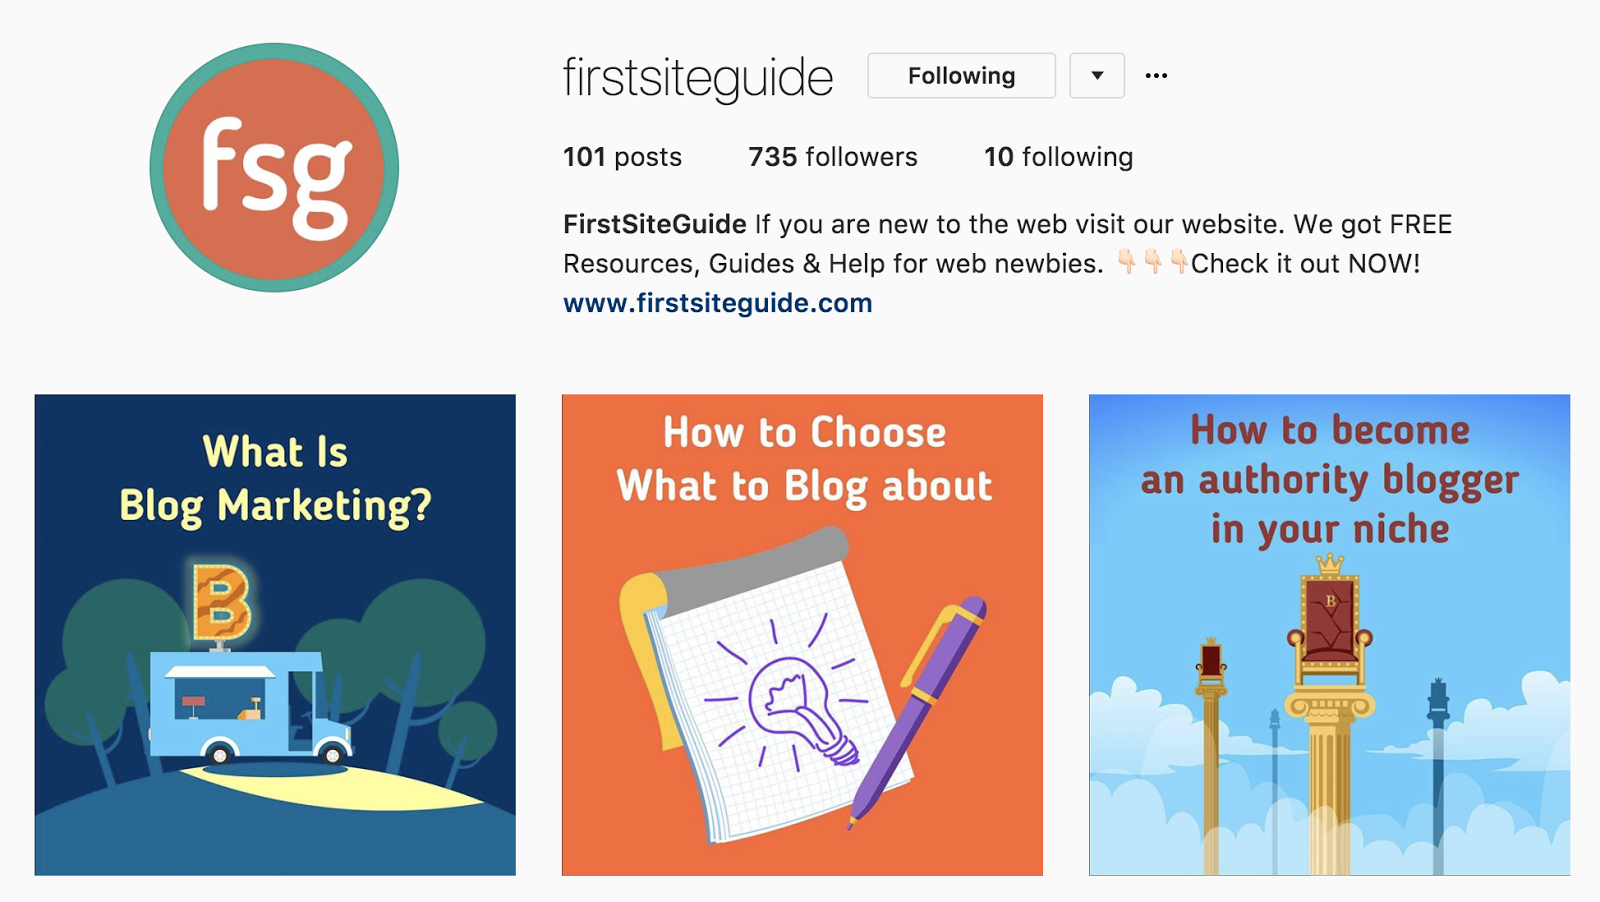 share content - selfpromotion browse images about selfpromotion at instagram imgrum